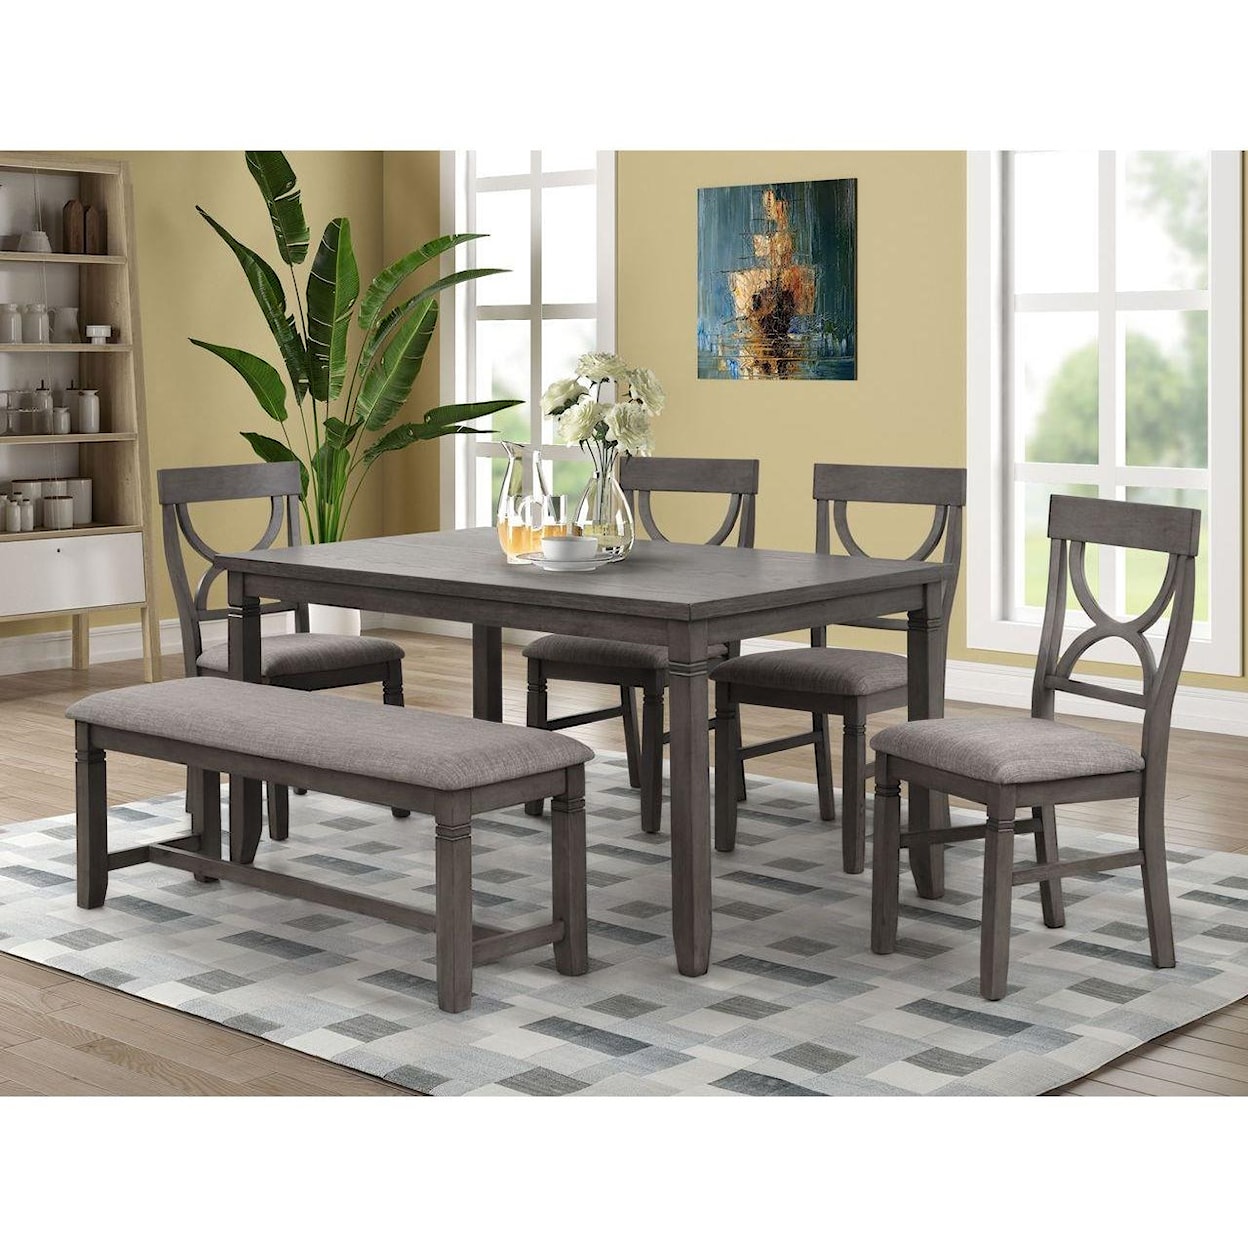 Lifestyle 8618 Dining Table, 4 Side Chairs and Bench